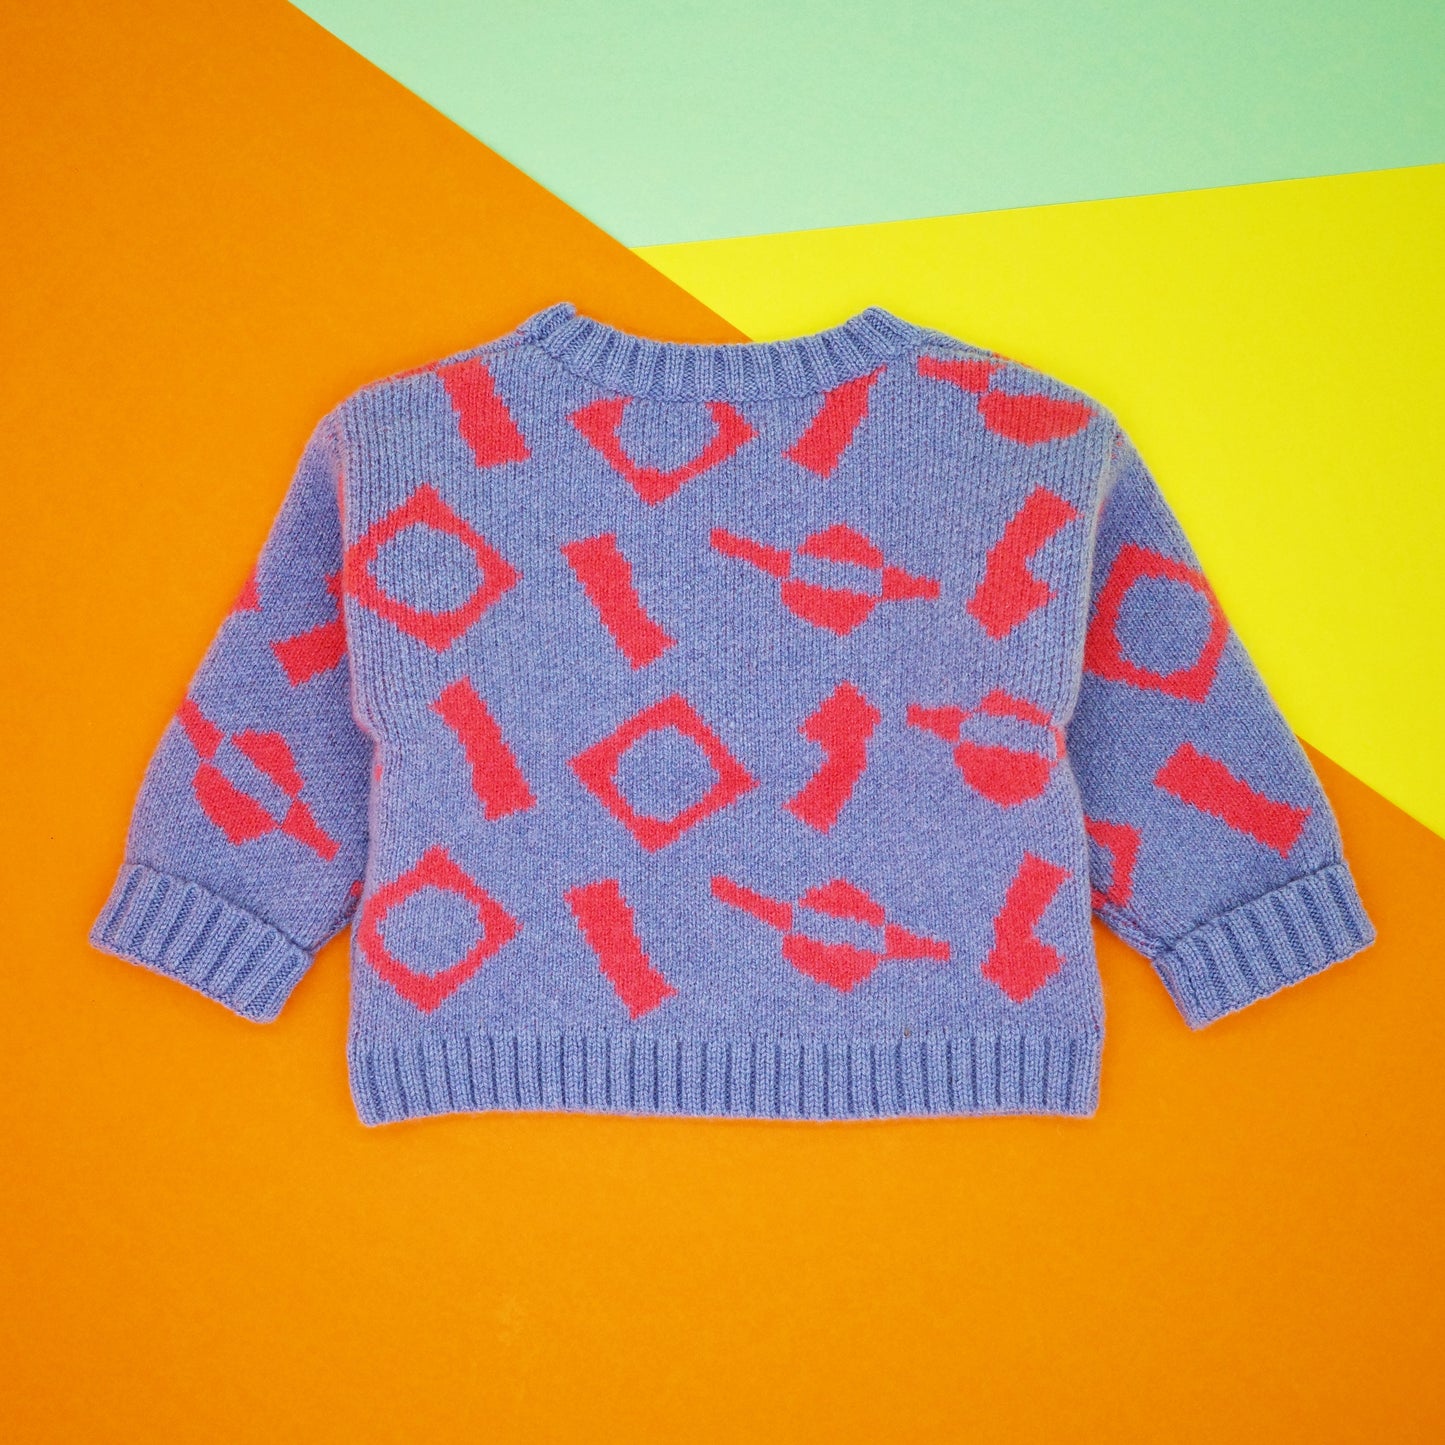 Blue and coral jacquard knit cardigan for children.